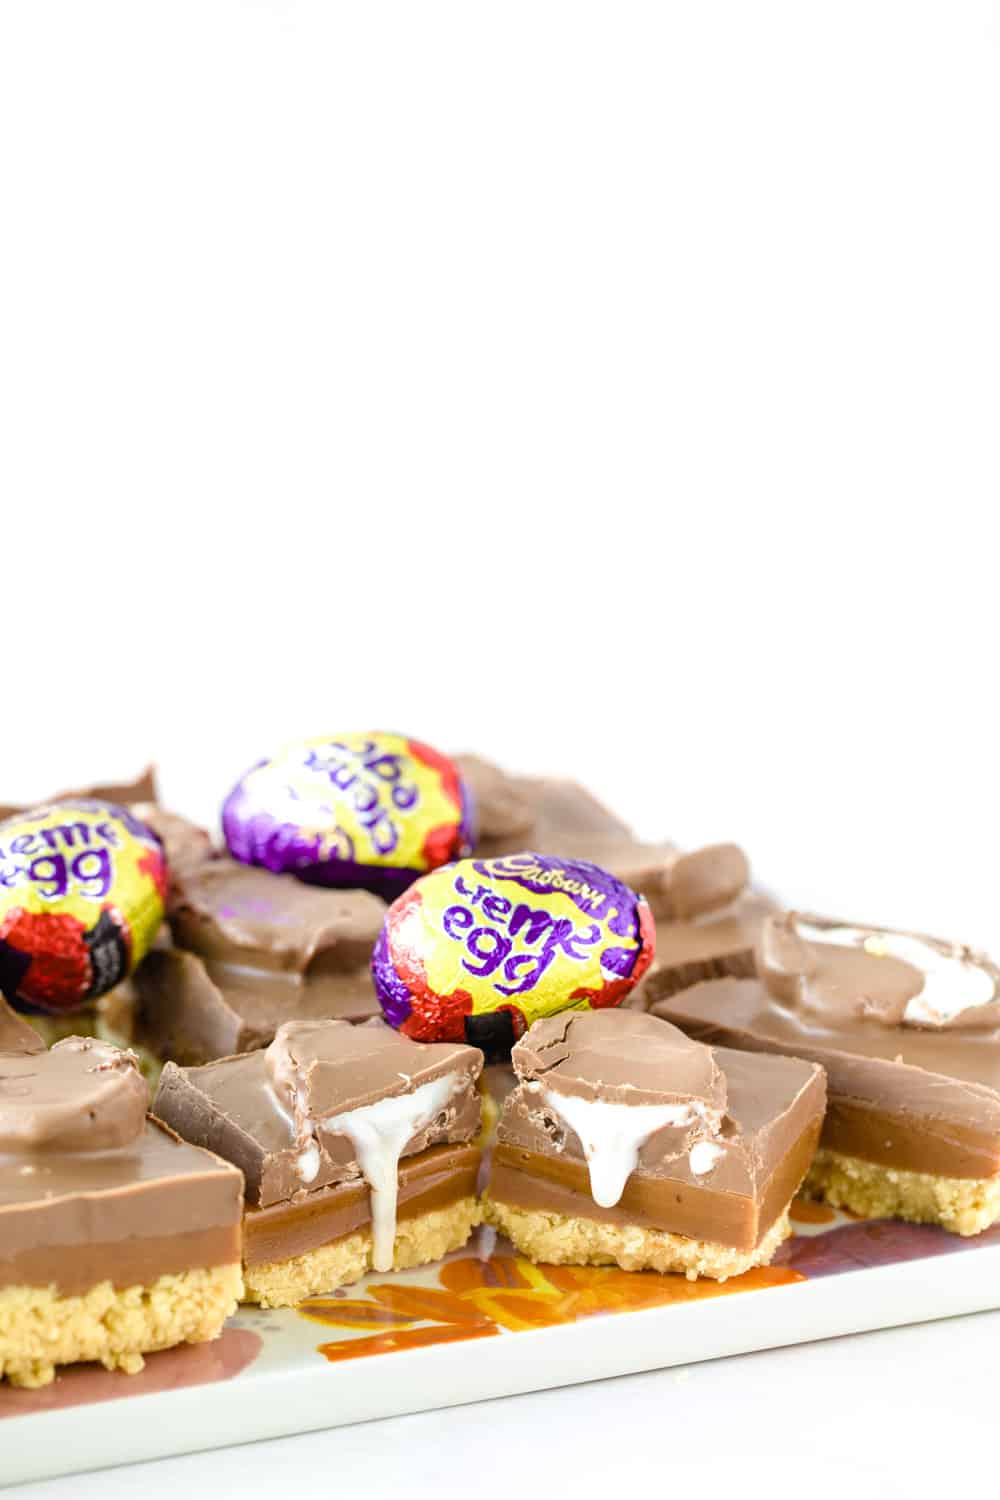 Slices of Creme egg caramel shortbread with Creme eggs on top